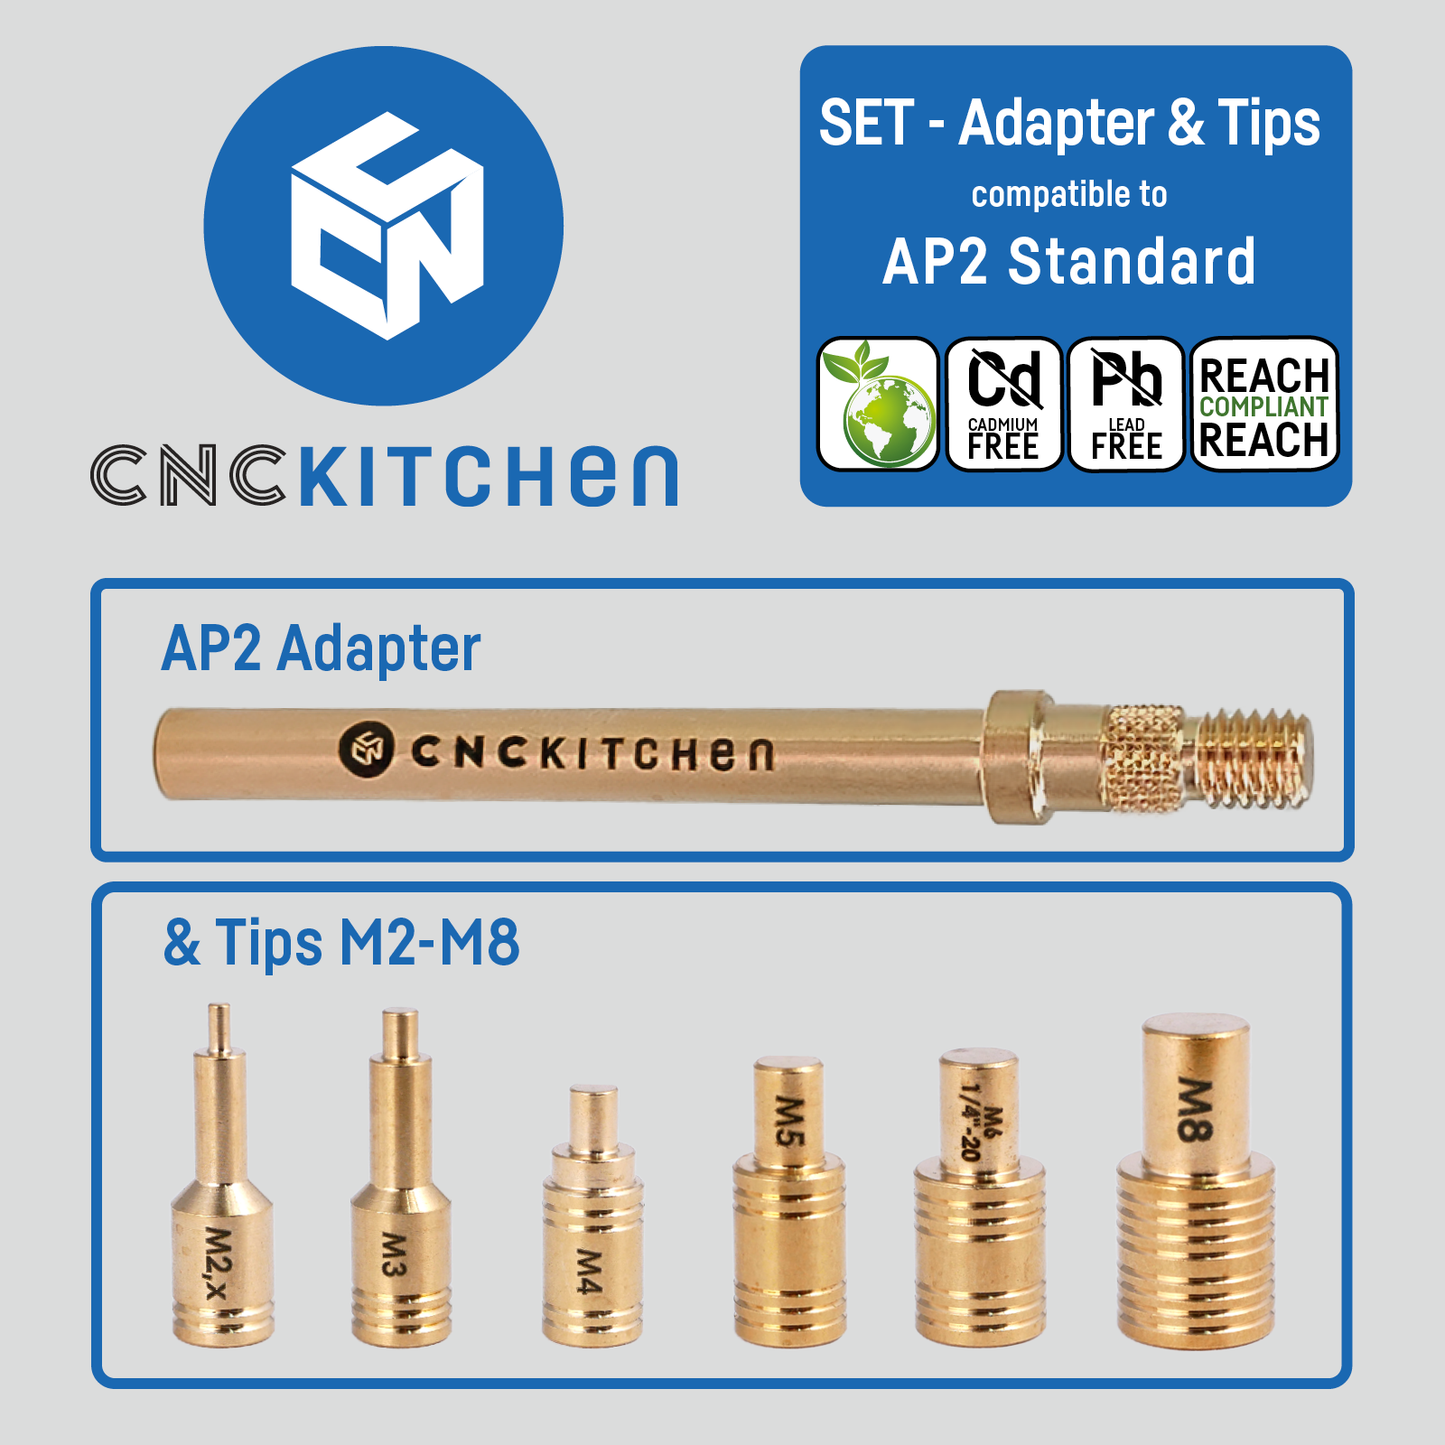 Soldering Tips SET compatible with AP2 Standard